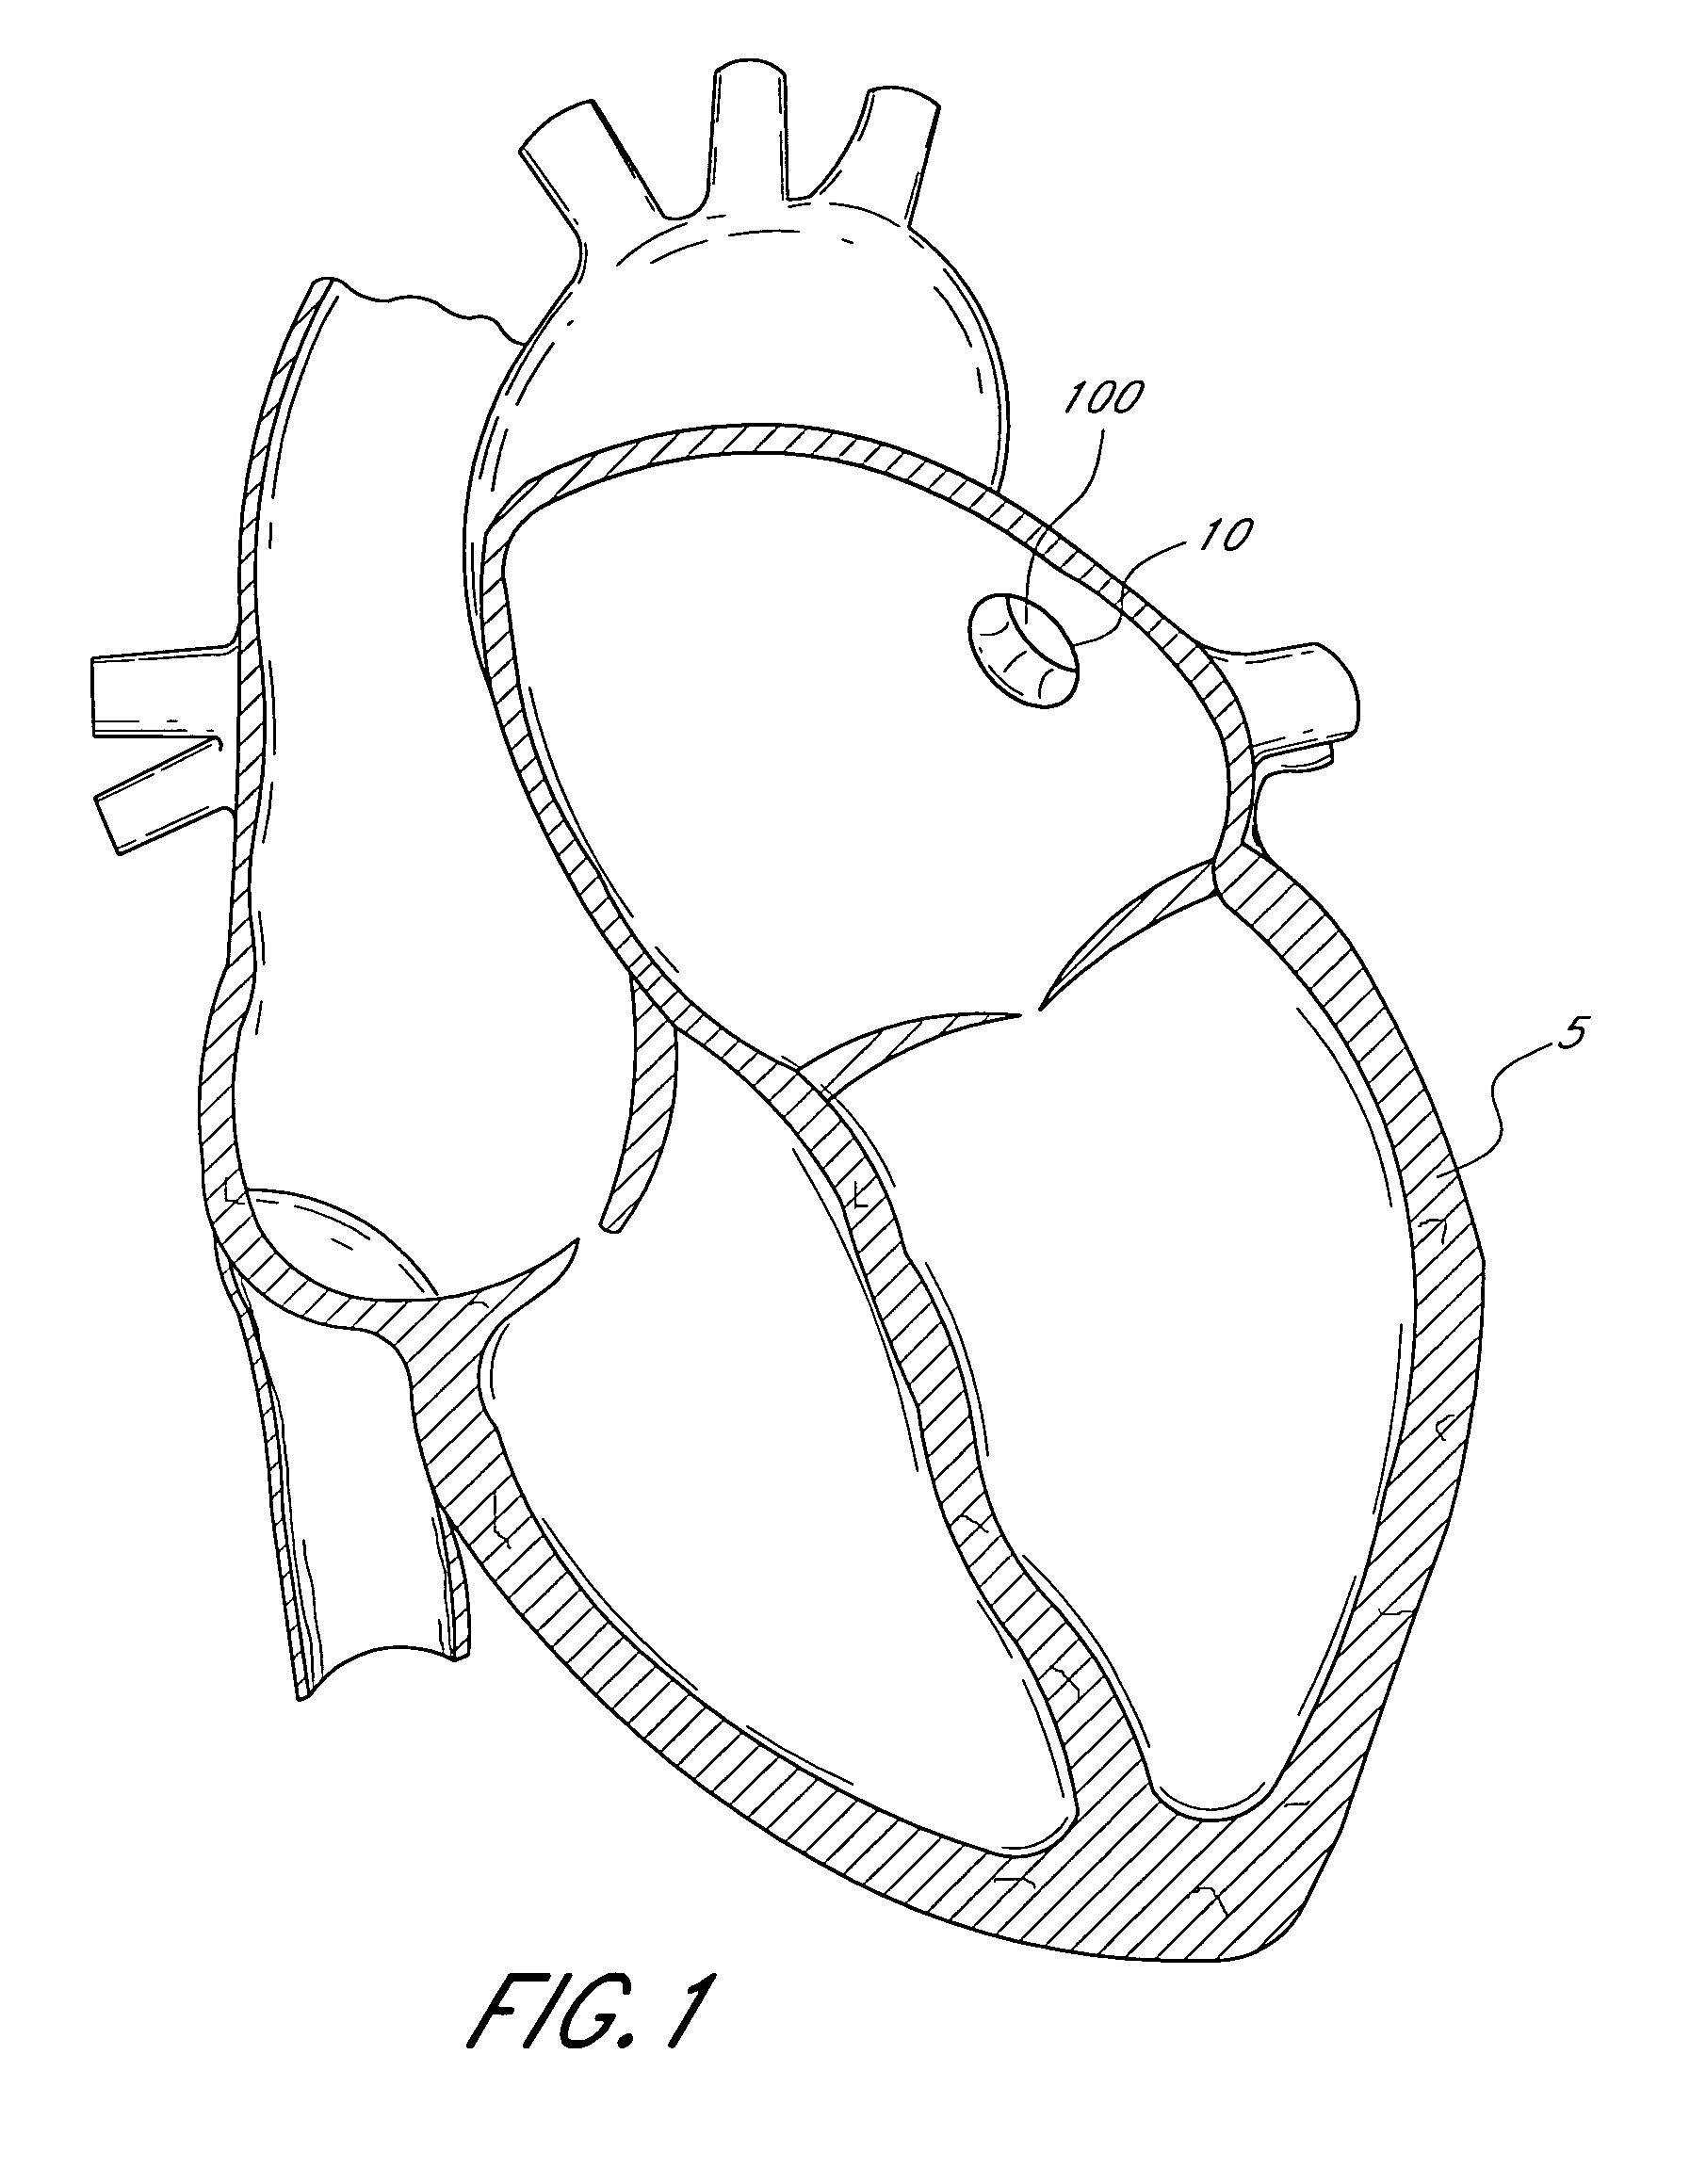 Method and apparatus for recapturing an implant from the left atrial appendage